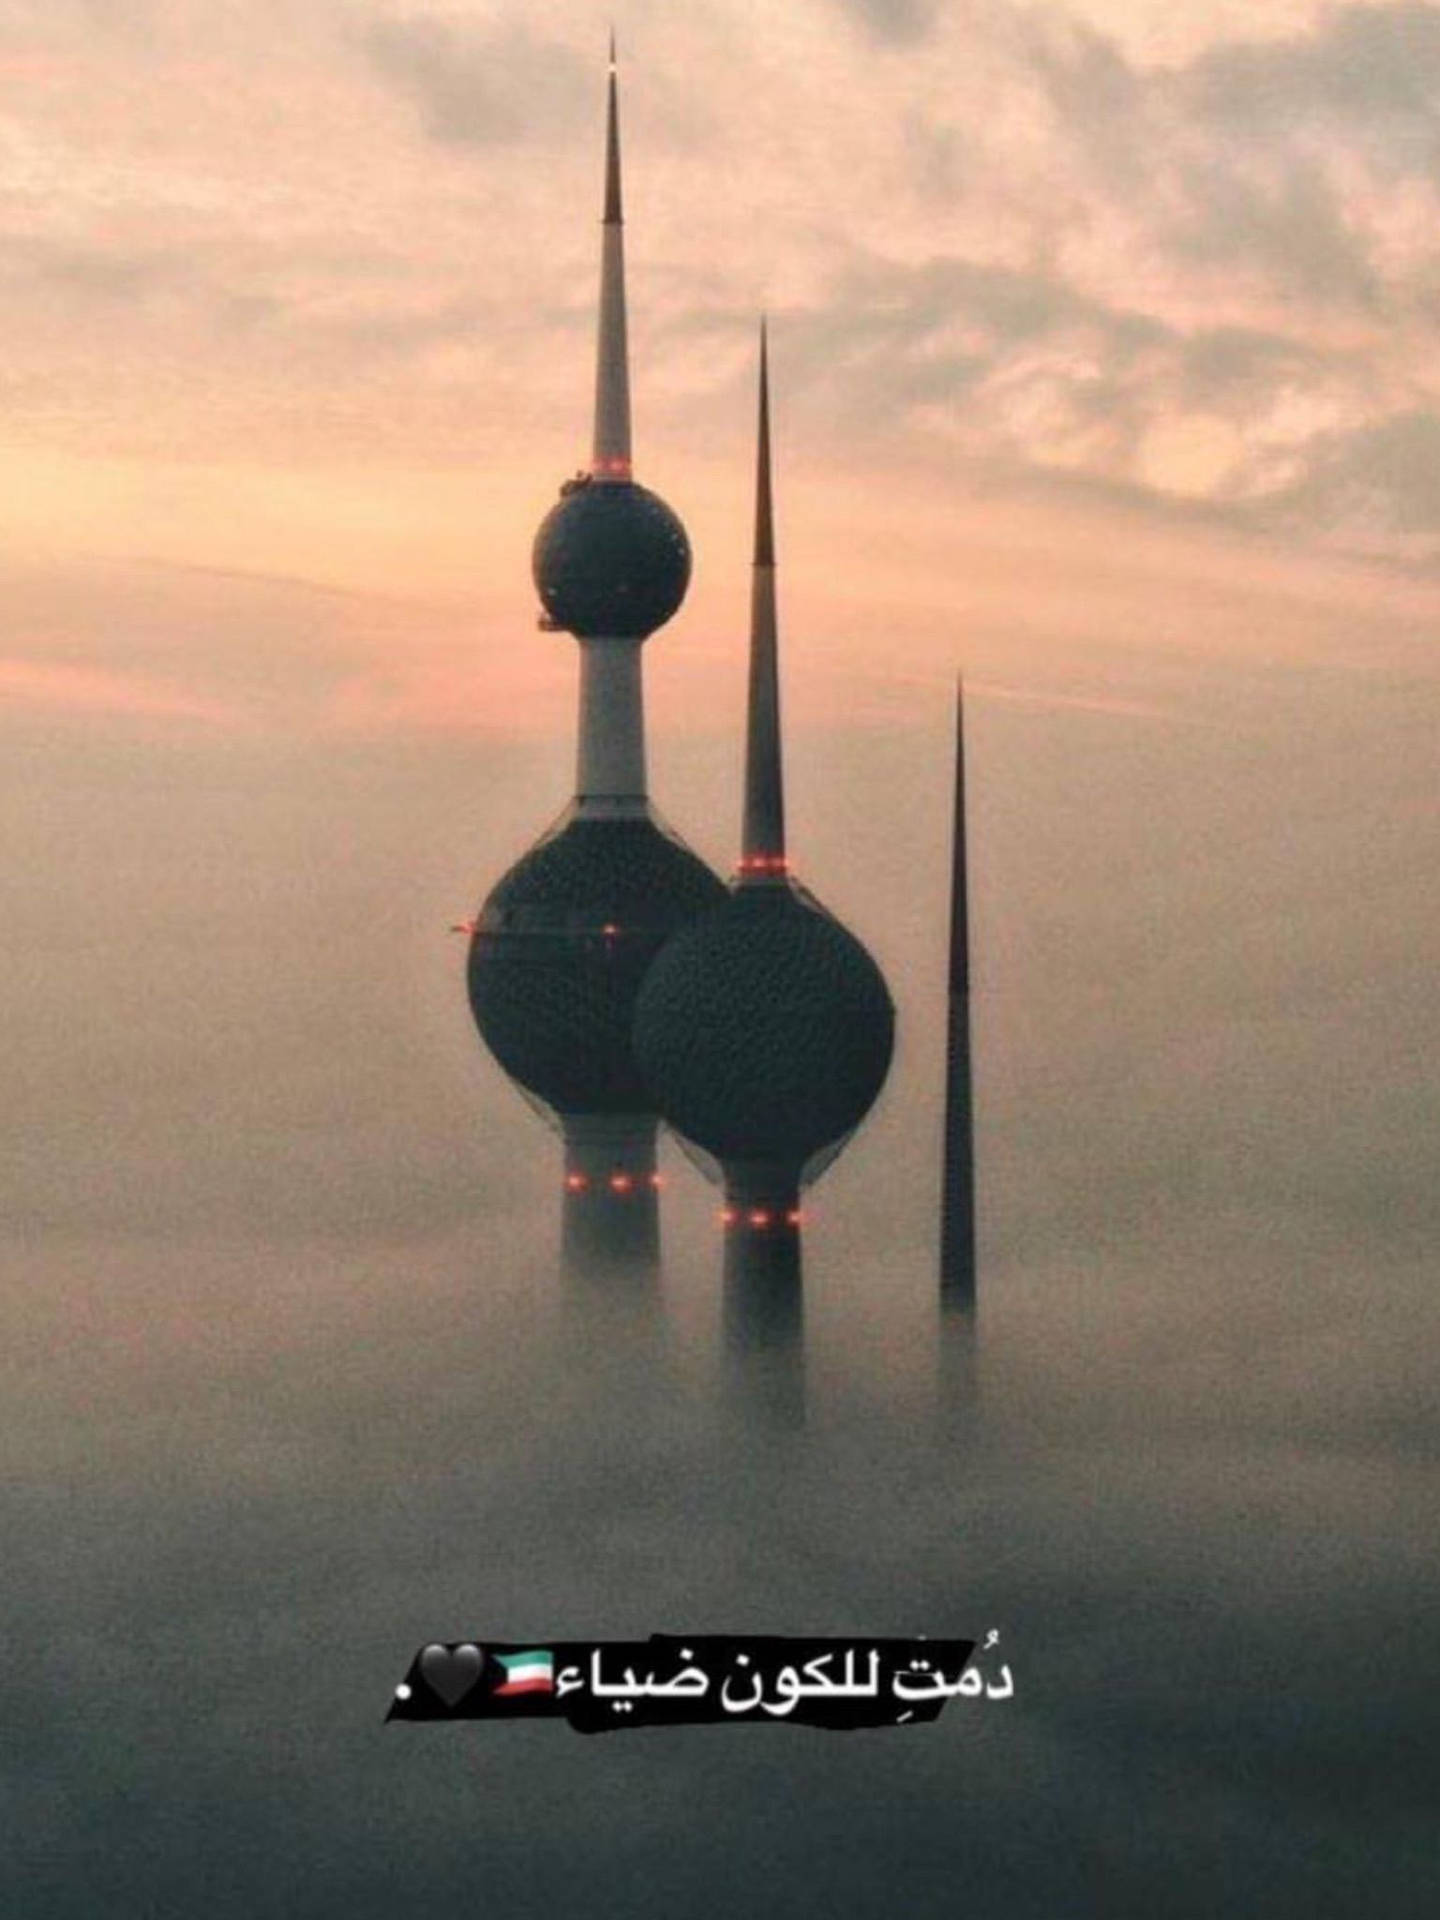 Kuwait Towers Piercing Through Clouds Background